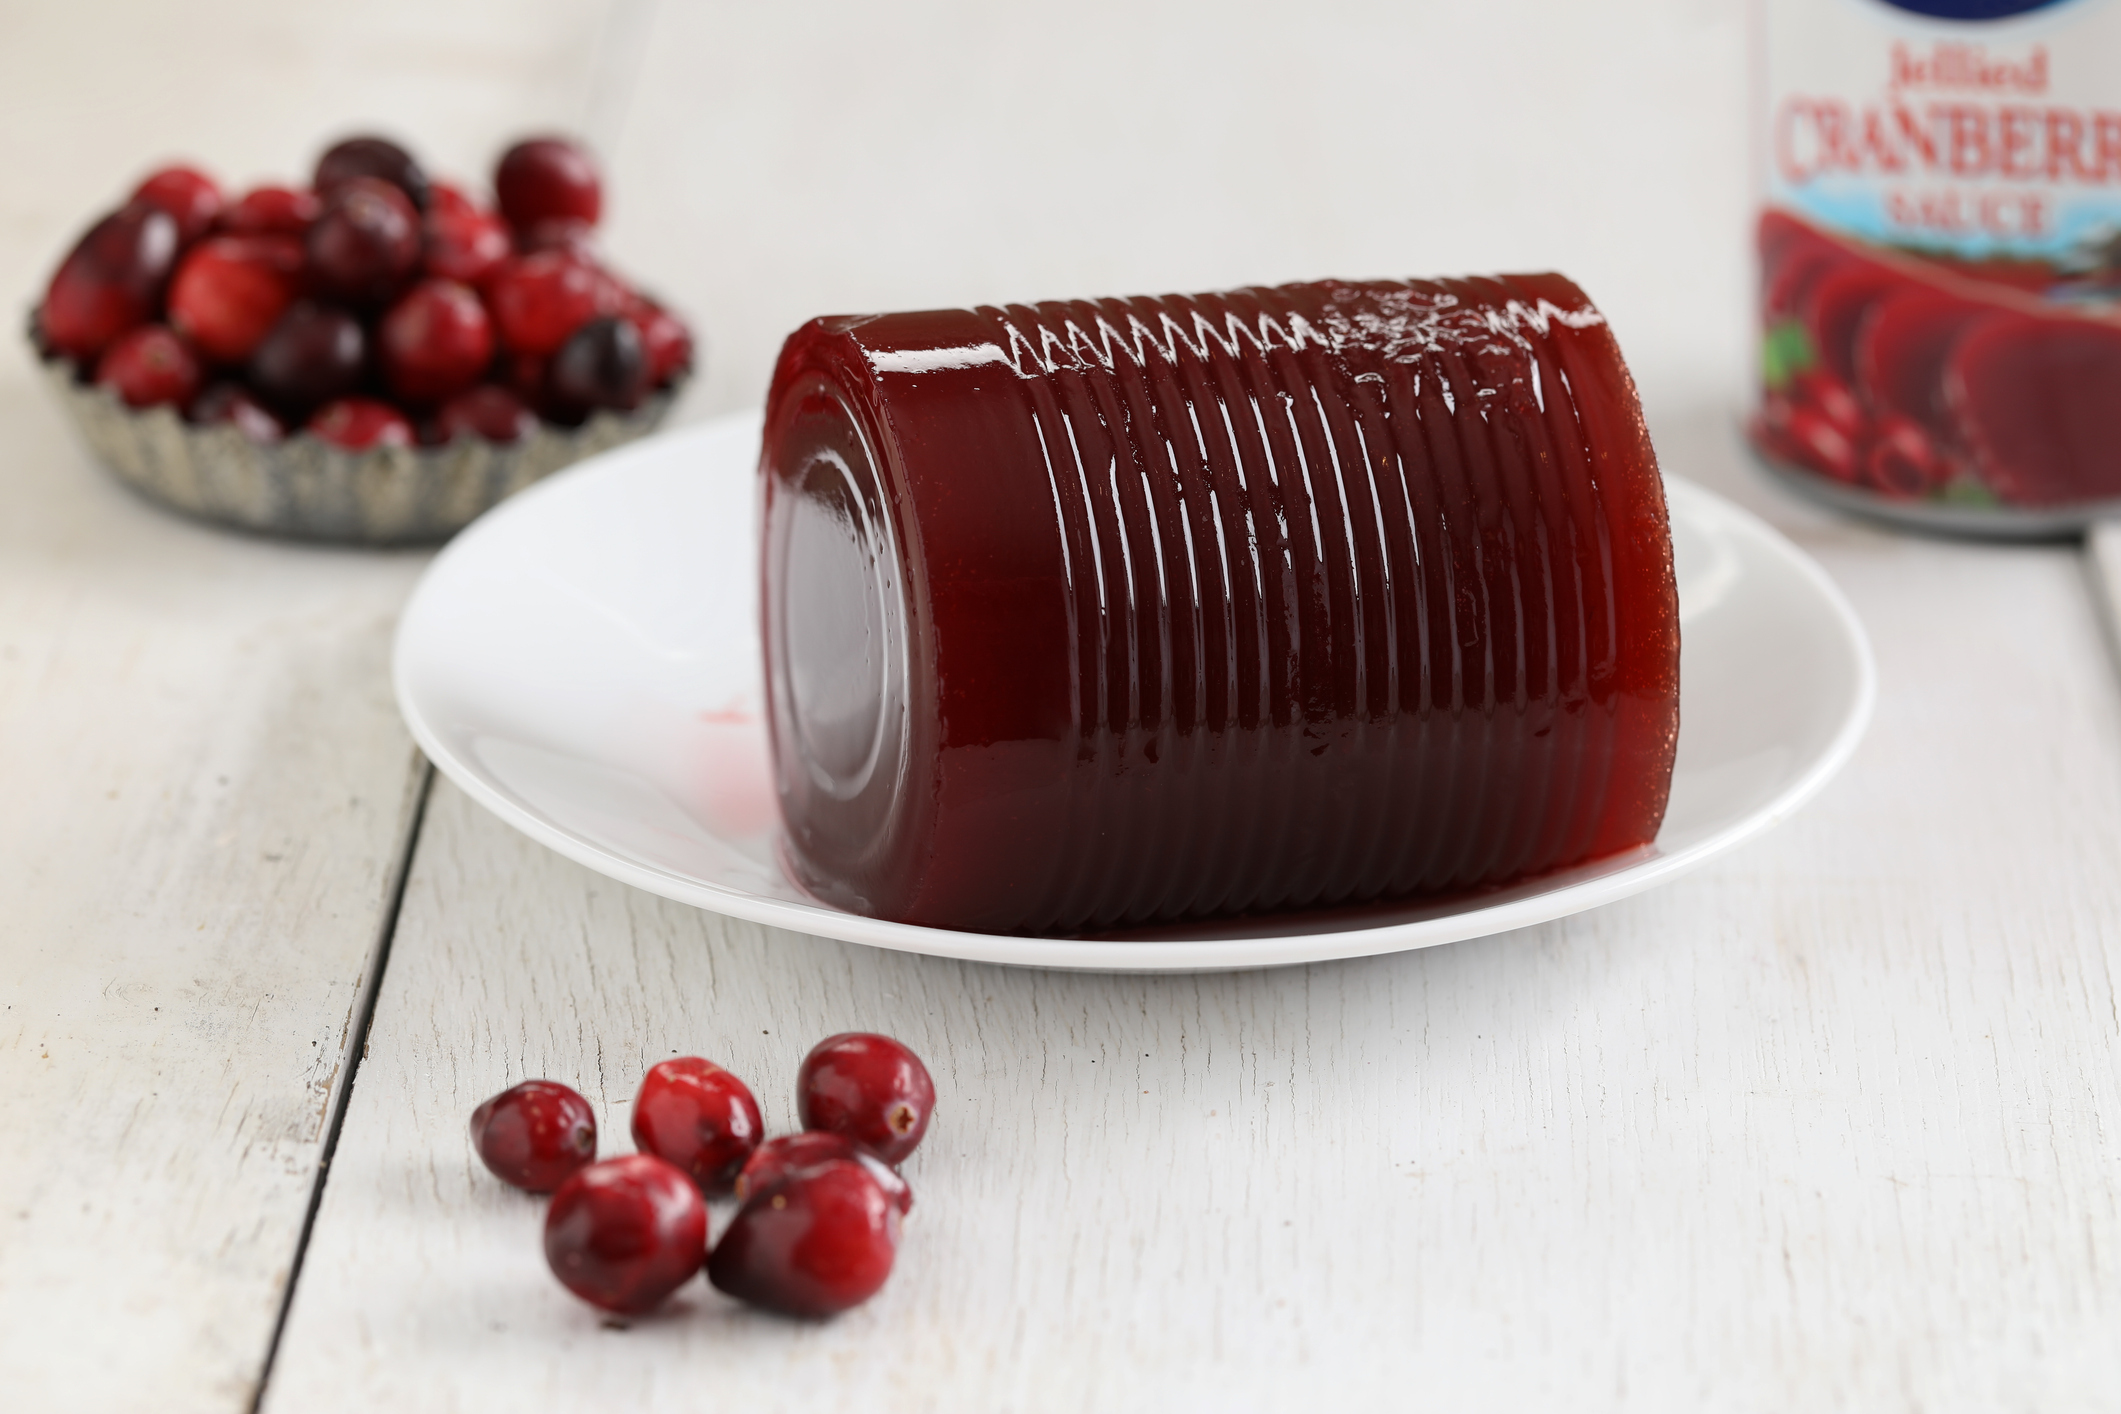 3. Canned Cranberry Sauce 